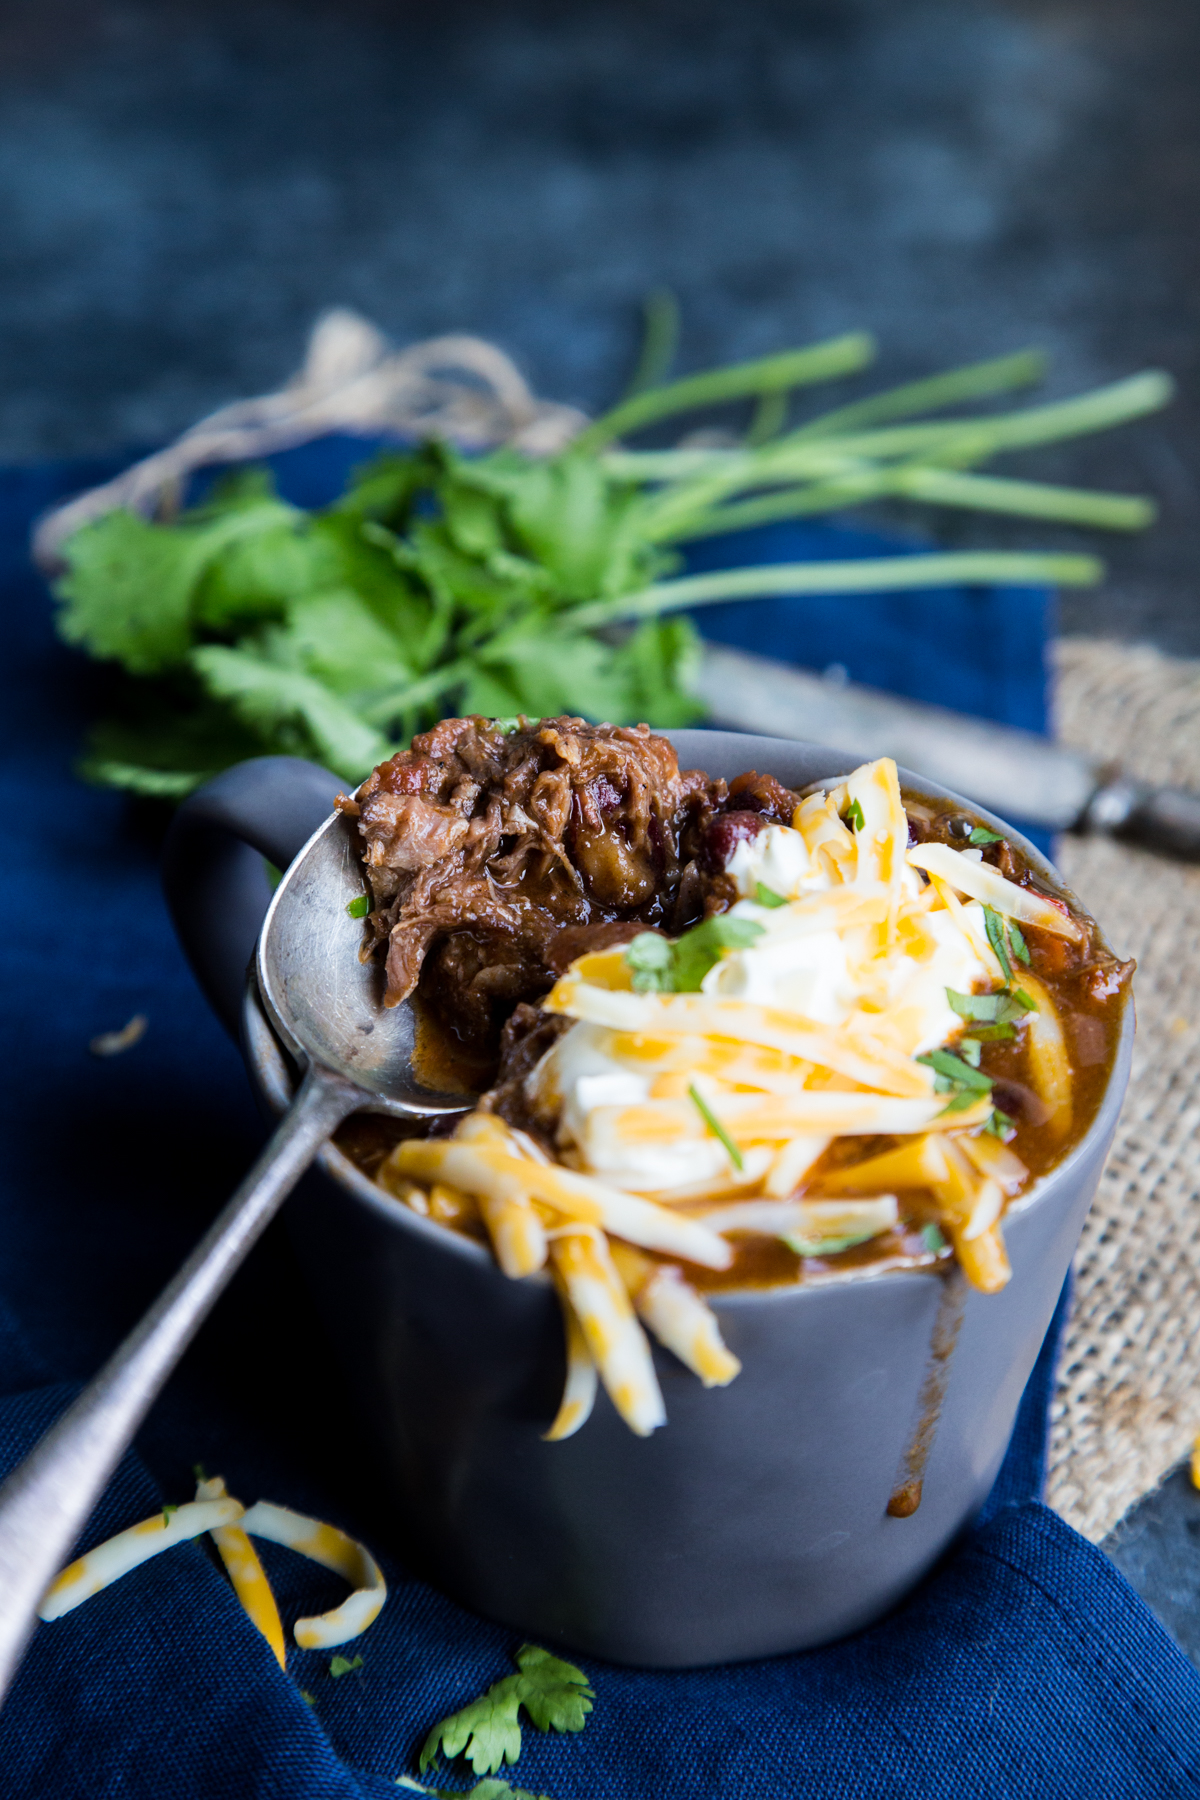 This low and slow cooked chili is packed with shredded beef and beans, and then topped with cheese for the most excellent chili con carne you have ever had! 